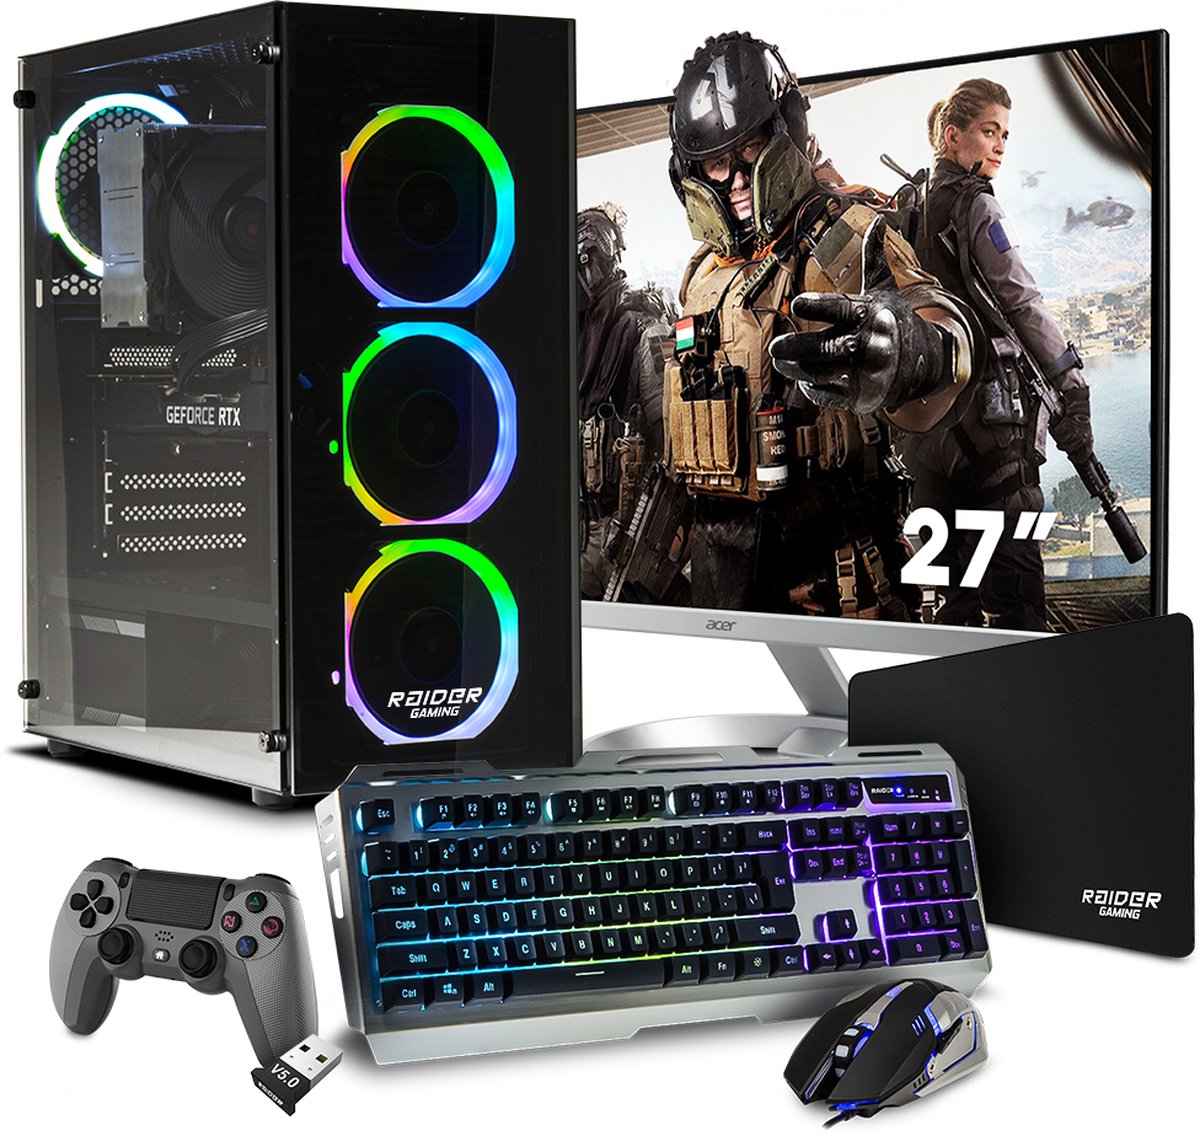 Complete set High-End Intel Game PC met 27 inch Gaming Monitor - incl. accessoires bundel en 27 RAIDER Gaming monitor - 16GB - NVIDIA RTX 3060Ti 8GB - 1000GB SSD - Windows 11